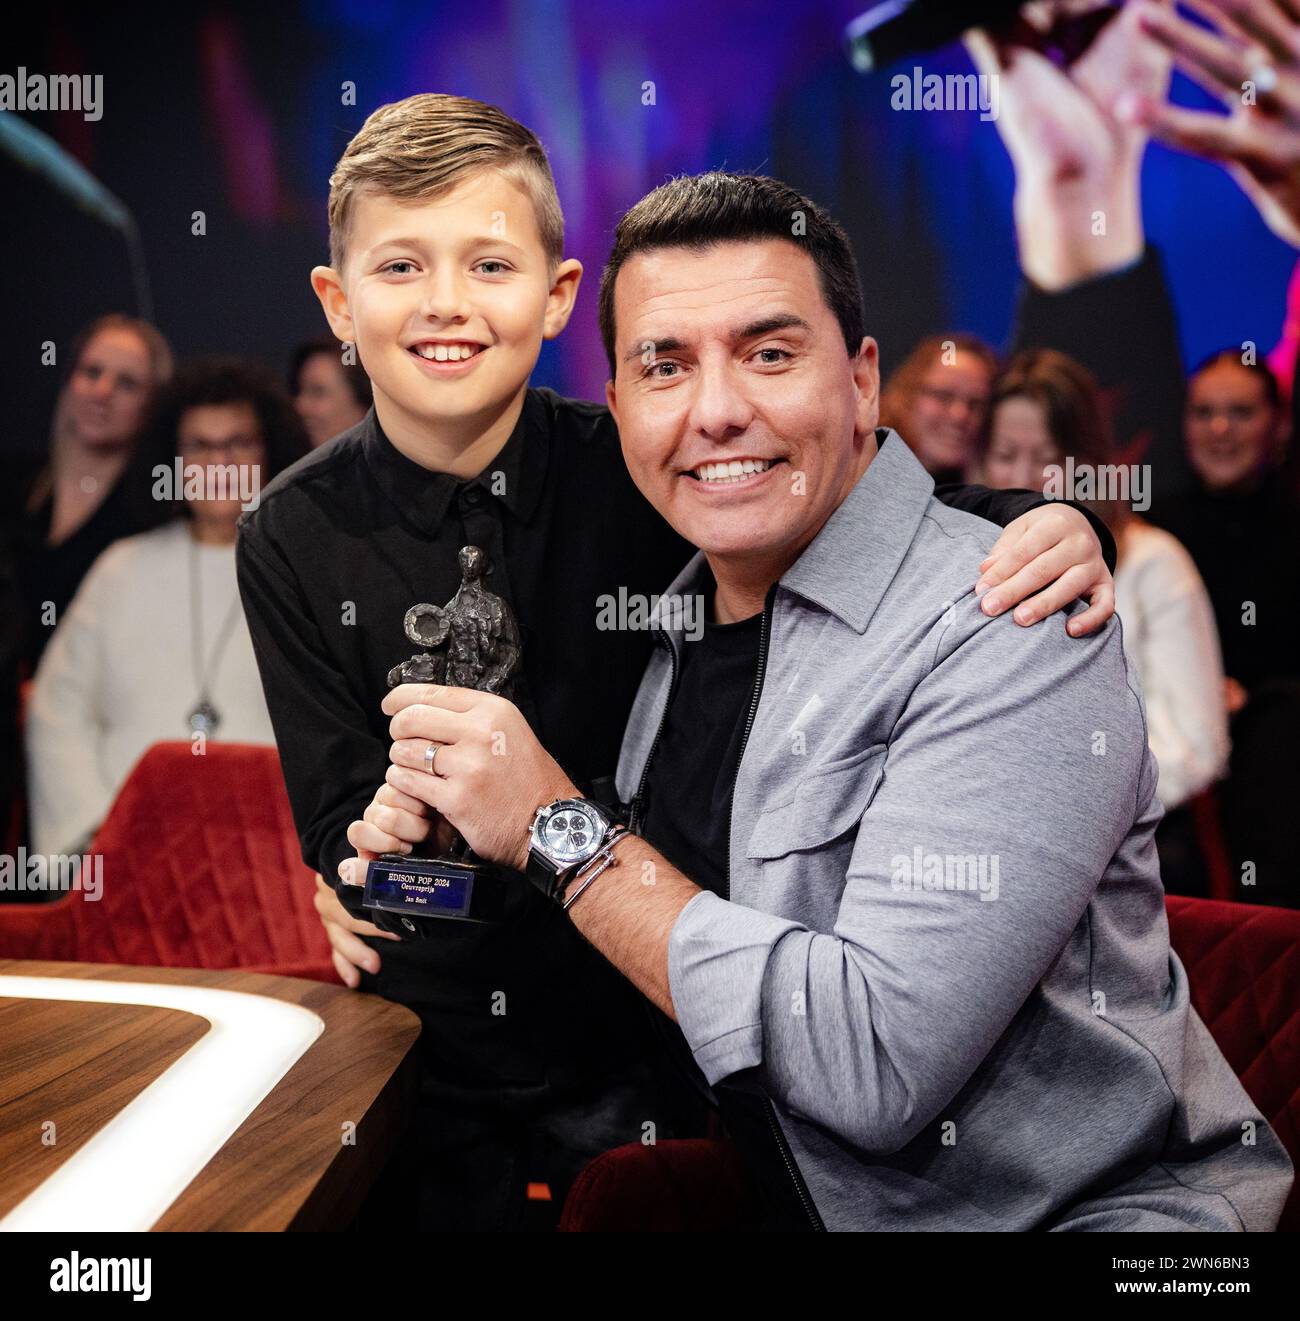 AMSTERDAM - Jan Smit receives an Edison Pop Oeuvre Prize from his son Senn Smit during a live broadcast of Humberto. ANP RAMON VAN FLYMEN netherlands out - belgium out Stock Photo